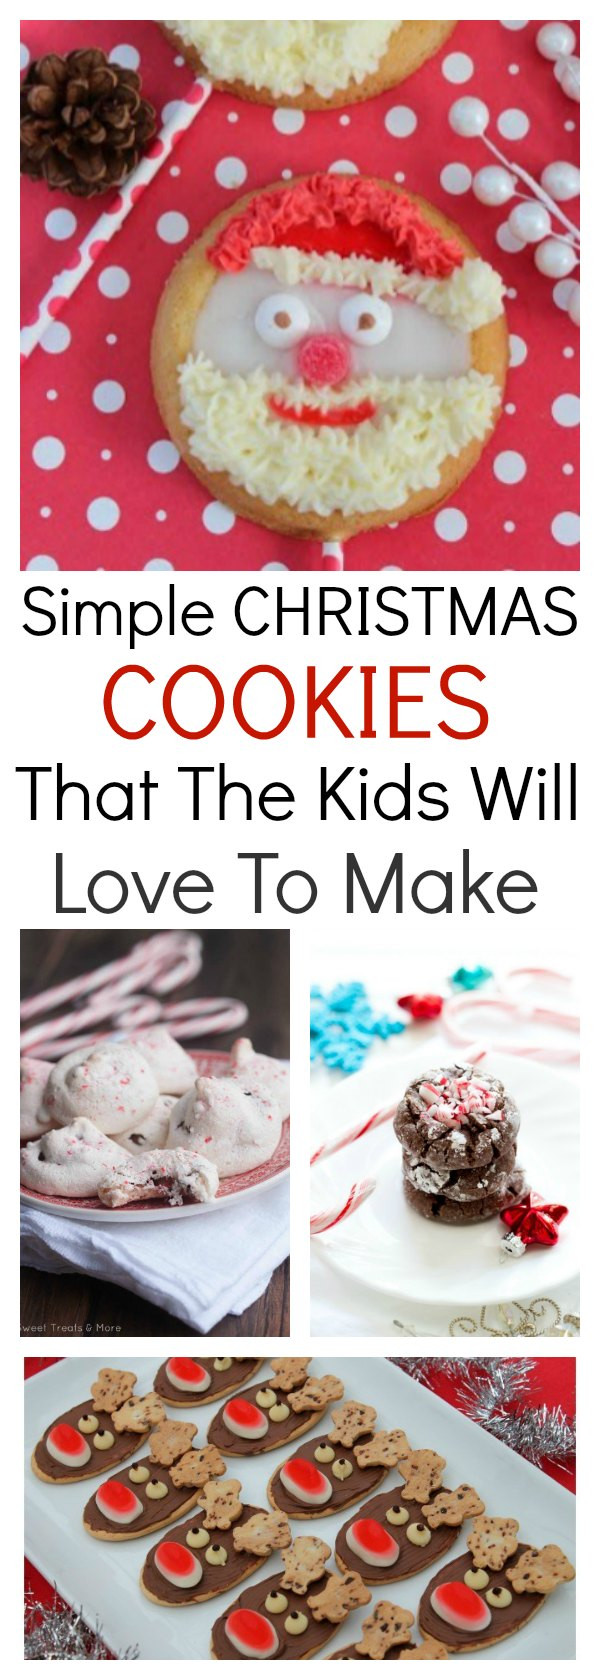 Easy Christmas Cookies For Kids
 Simple Christmas Cookies To Make With The Kids